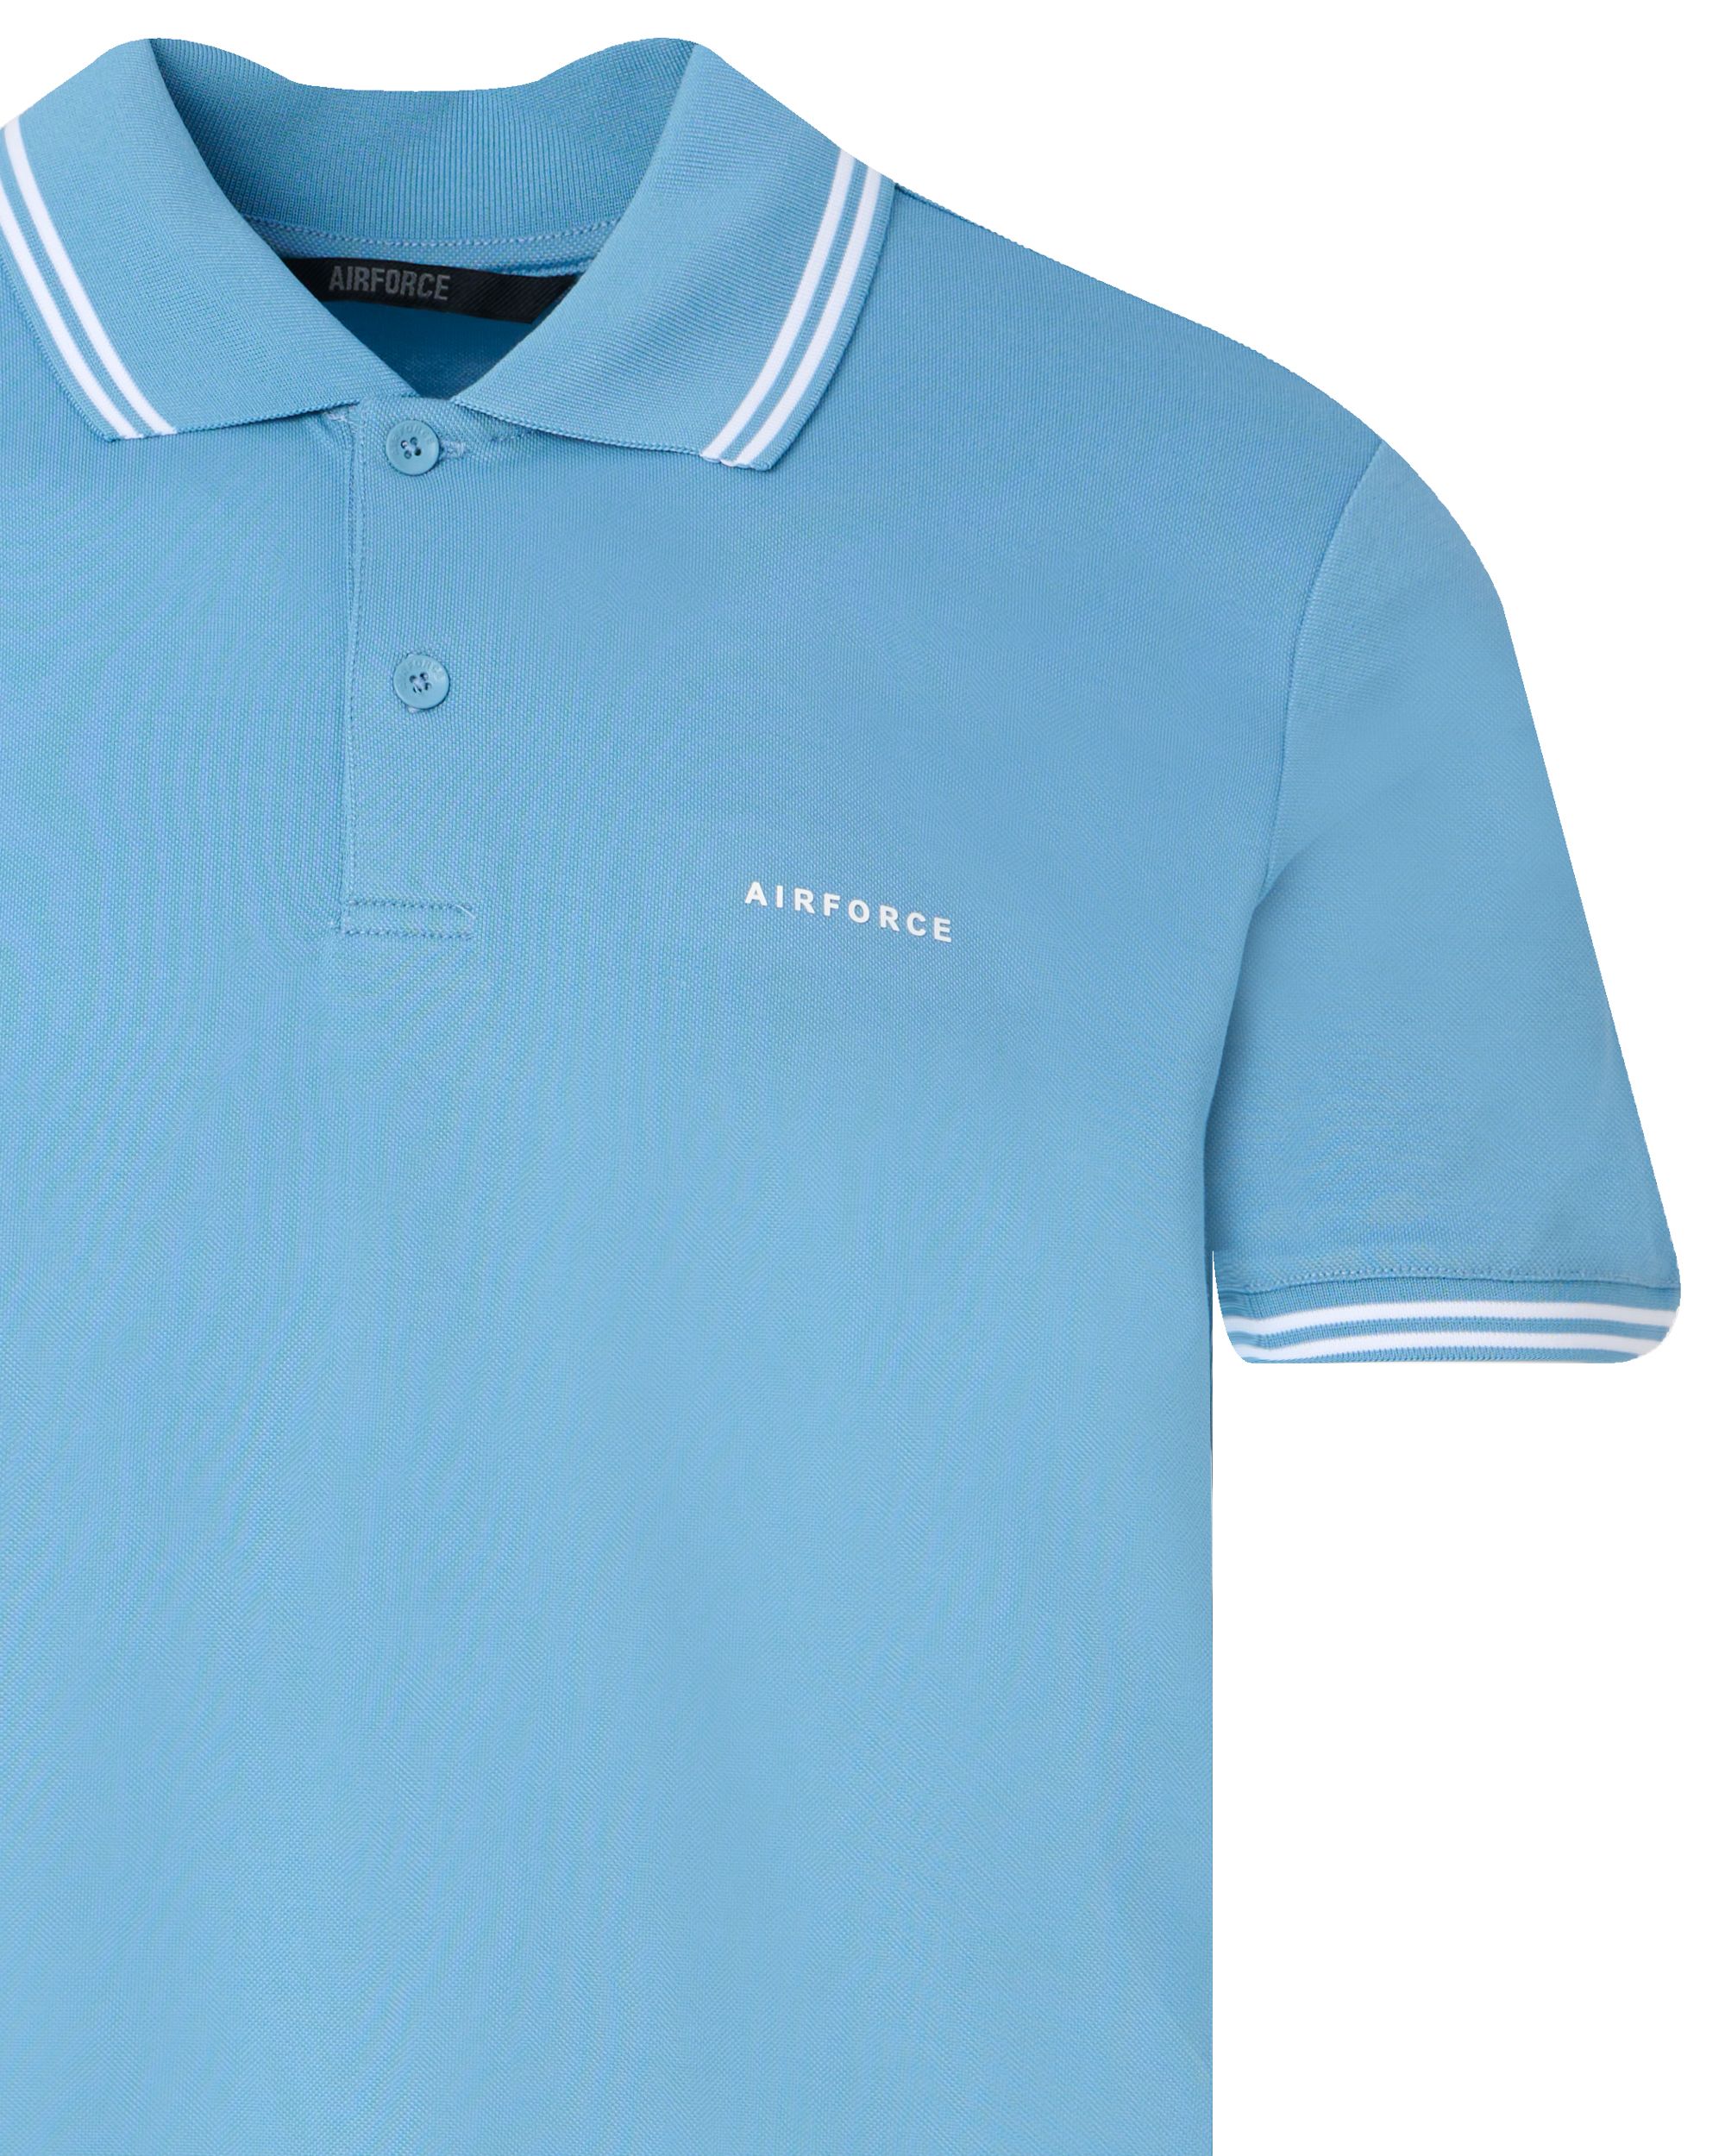 Airforce Polo KM Donker blauw 092911-001-L